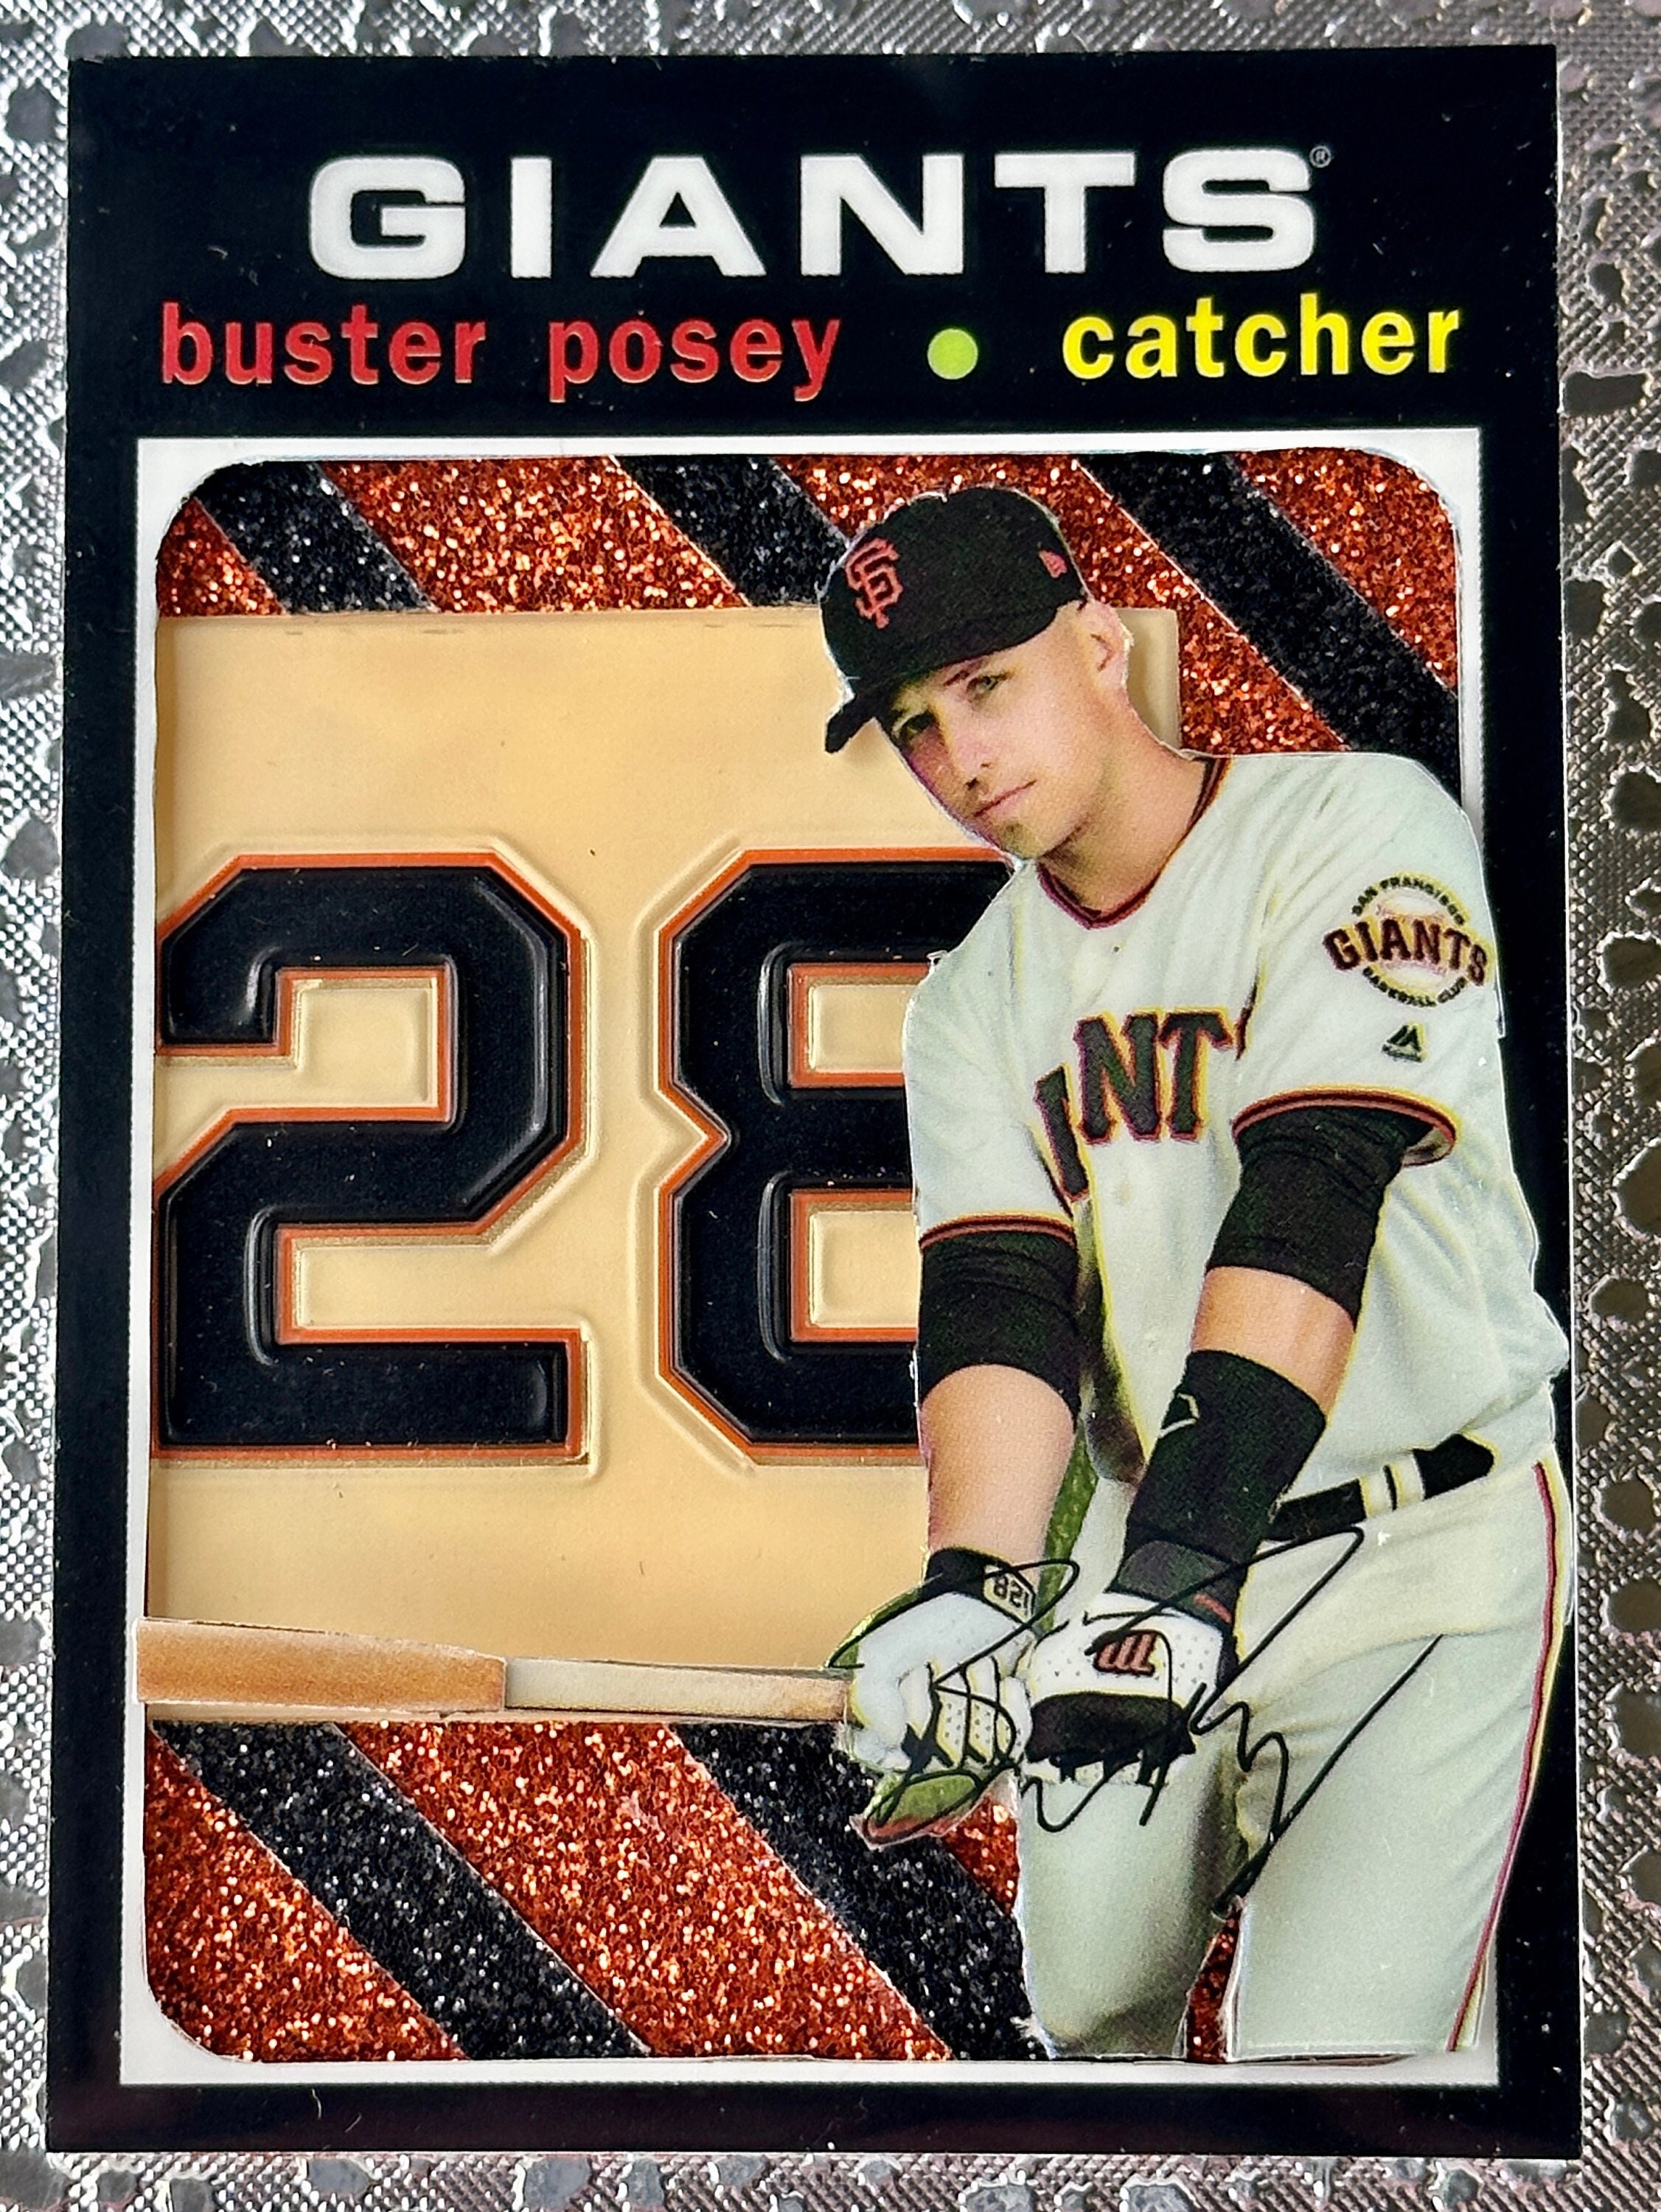 Buster Posey Premium T-shirt in Mens Sizes S-3XL in Black or 